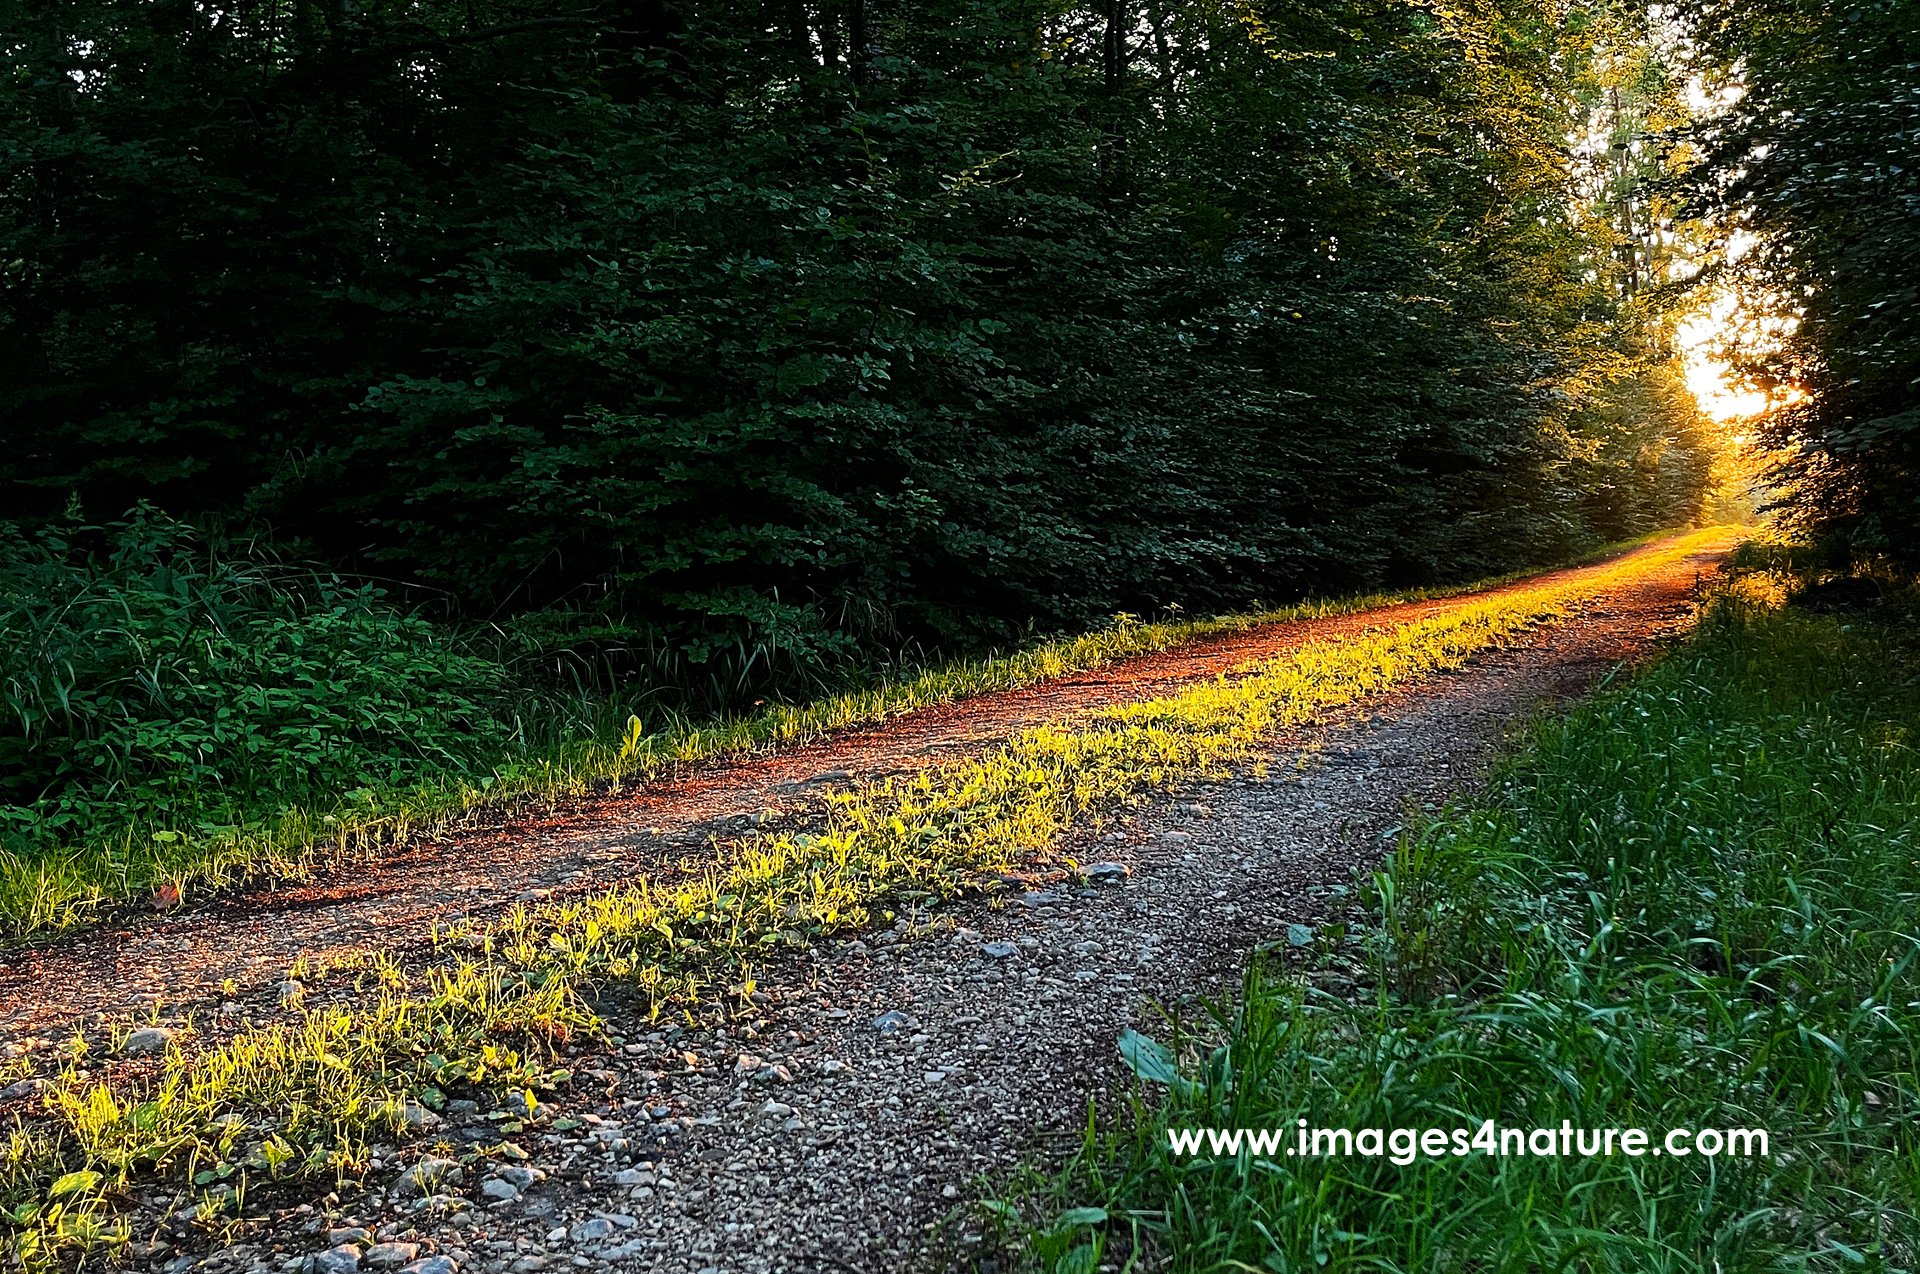 Gravel road in the forest leading into the evening sun